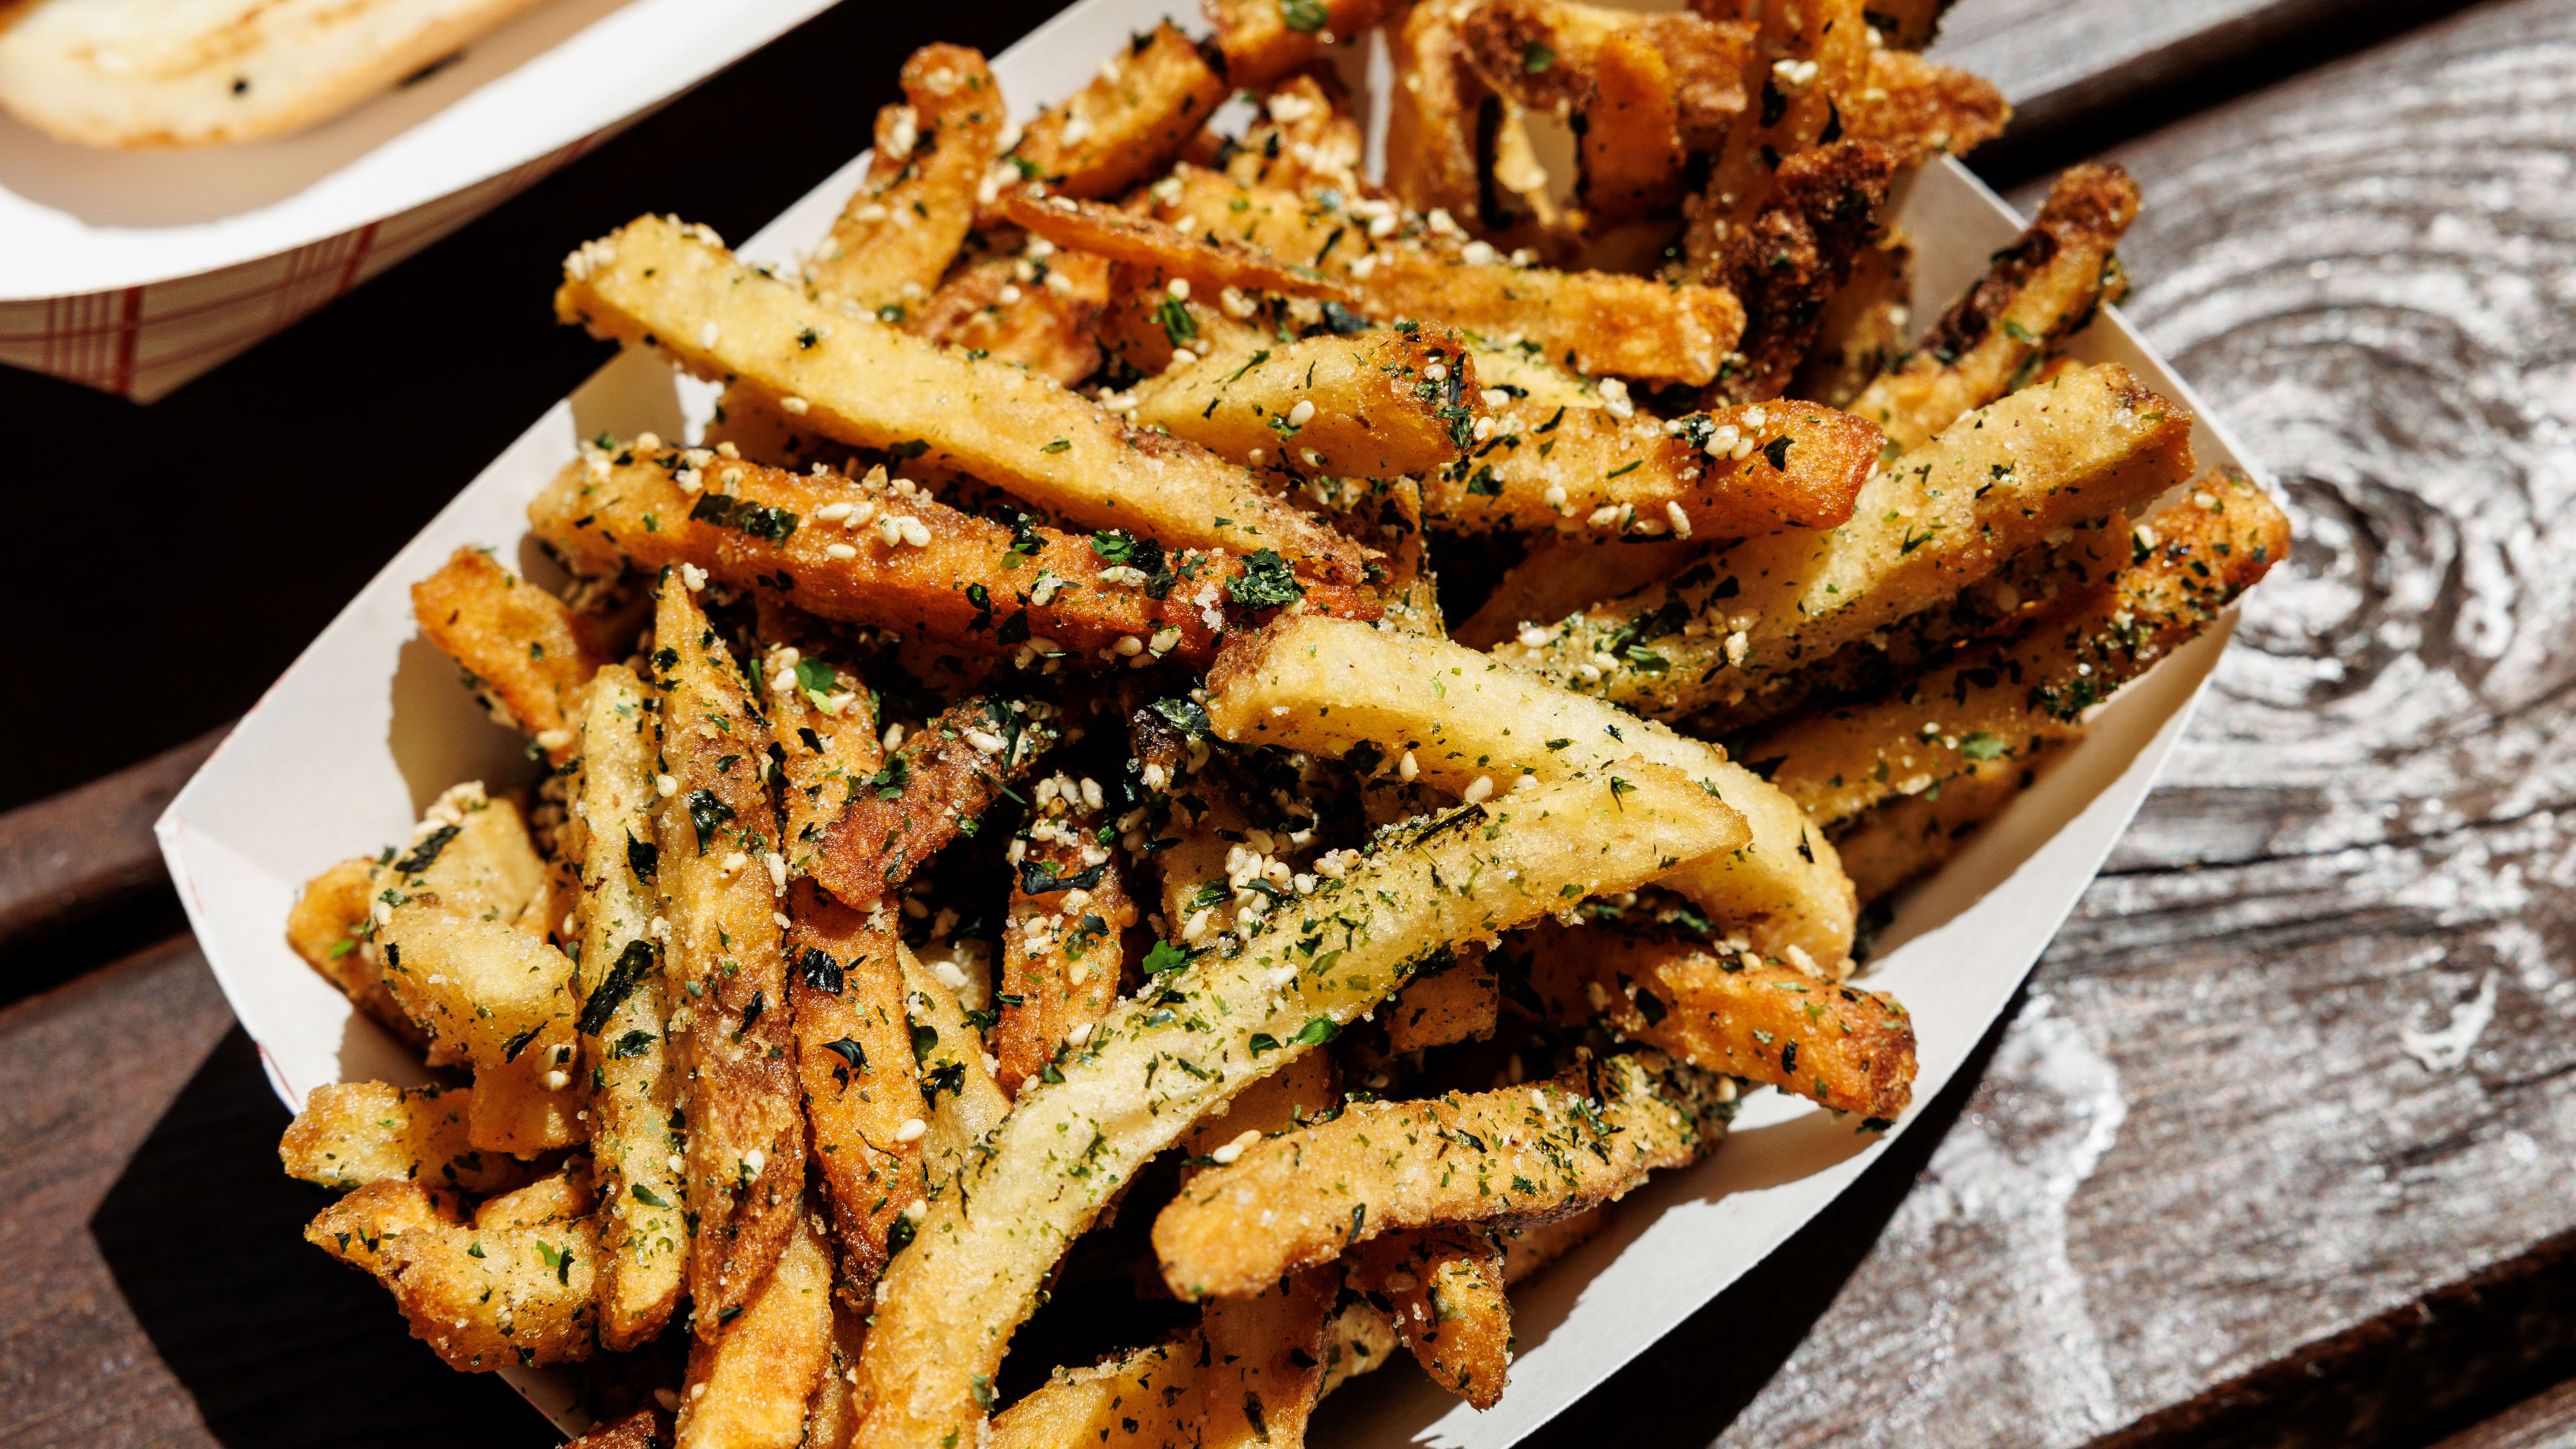 furikake topped fries in paper tray